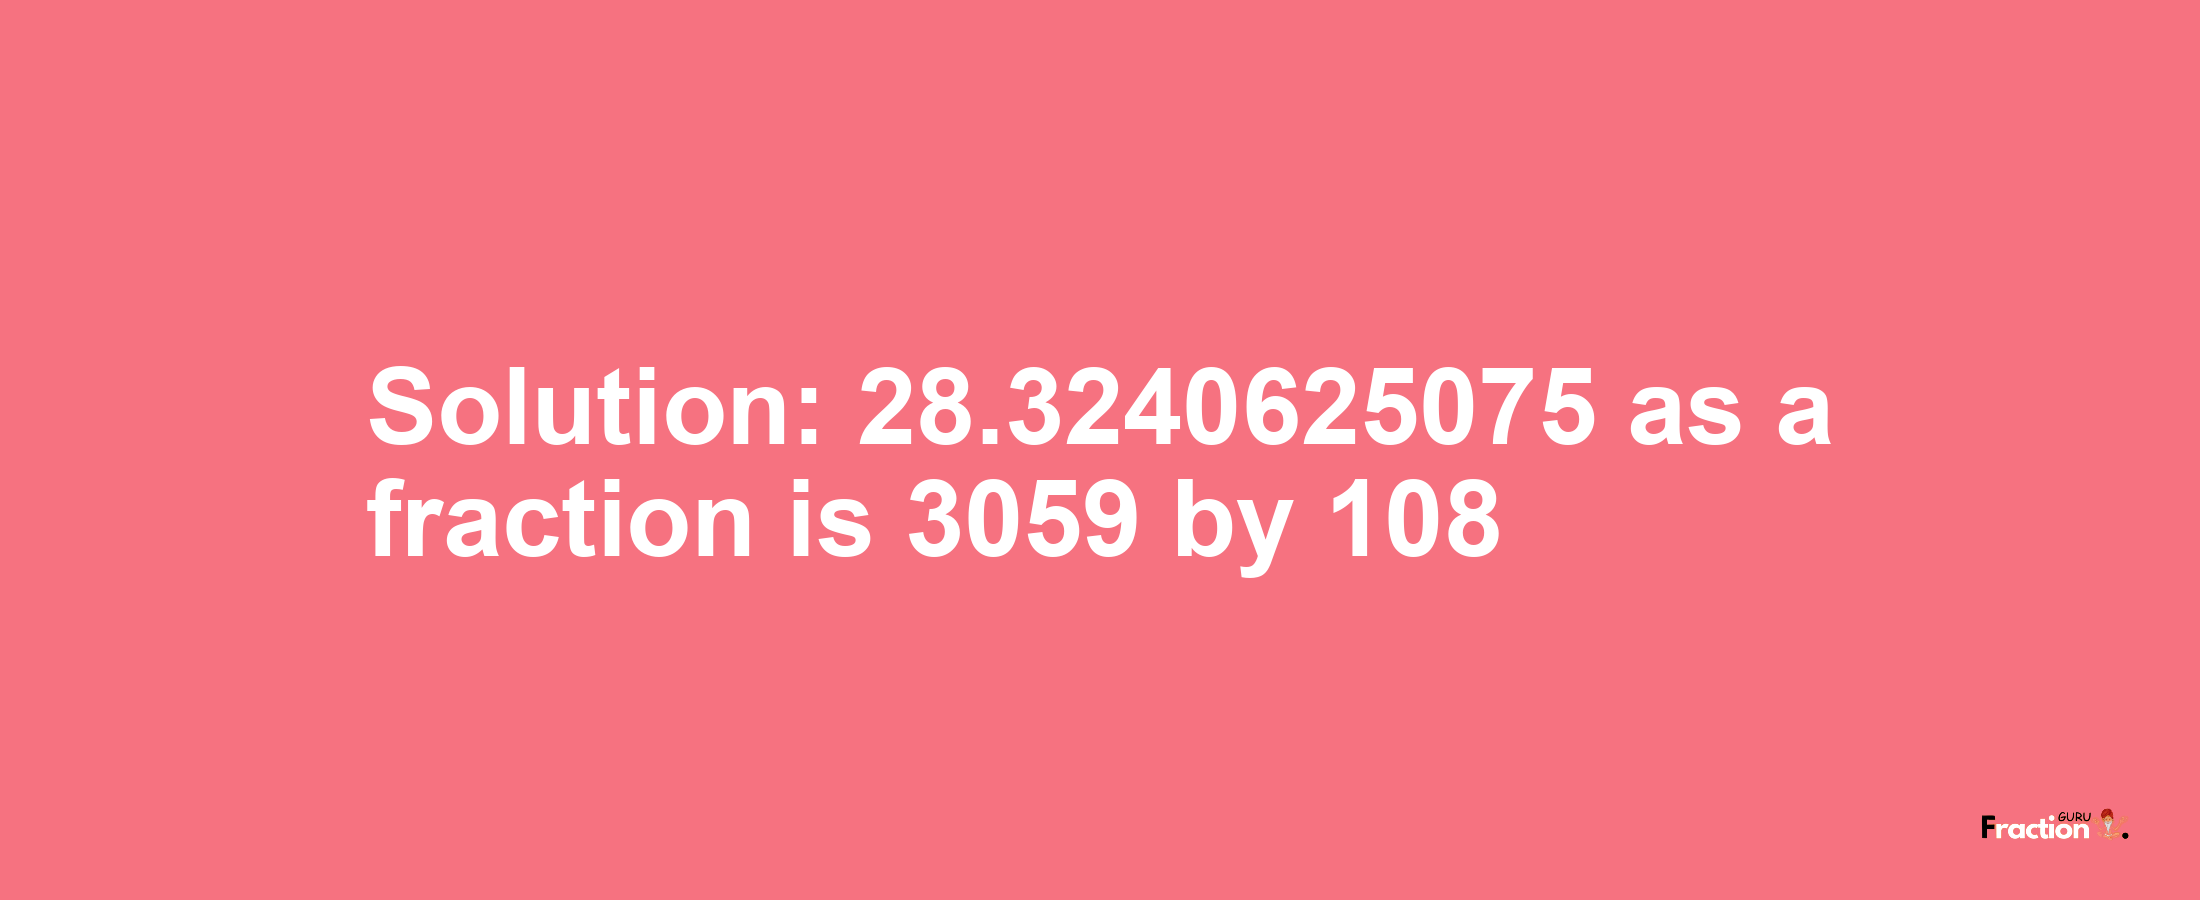 Solution:28.3240625075 as a fraction is 3059/108